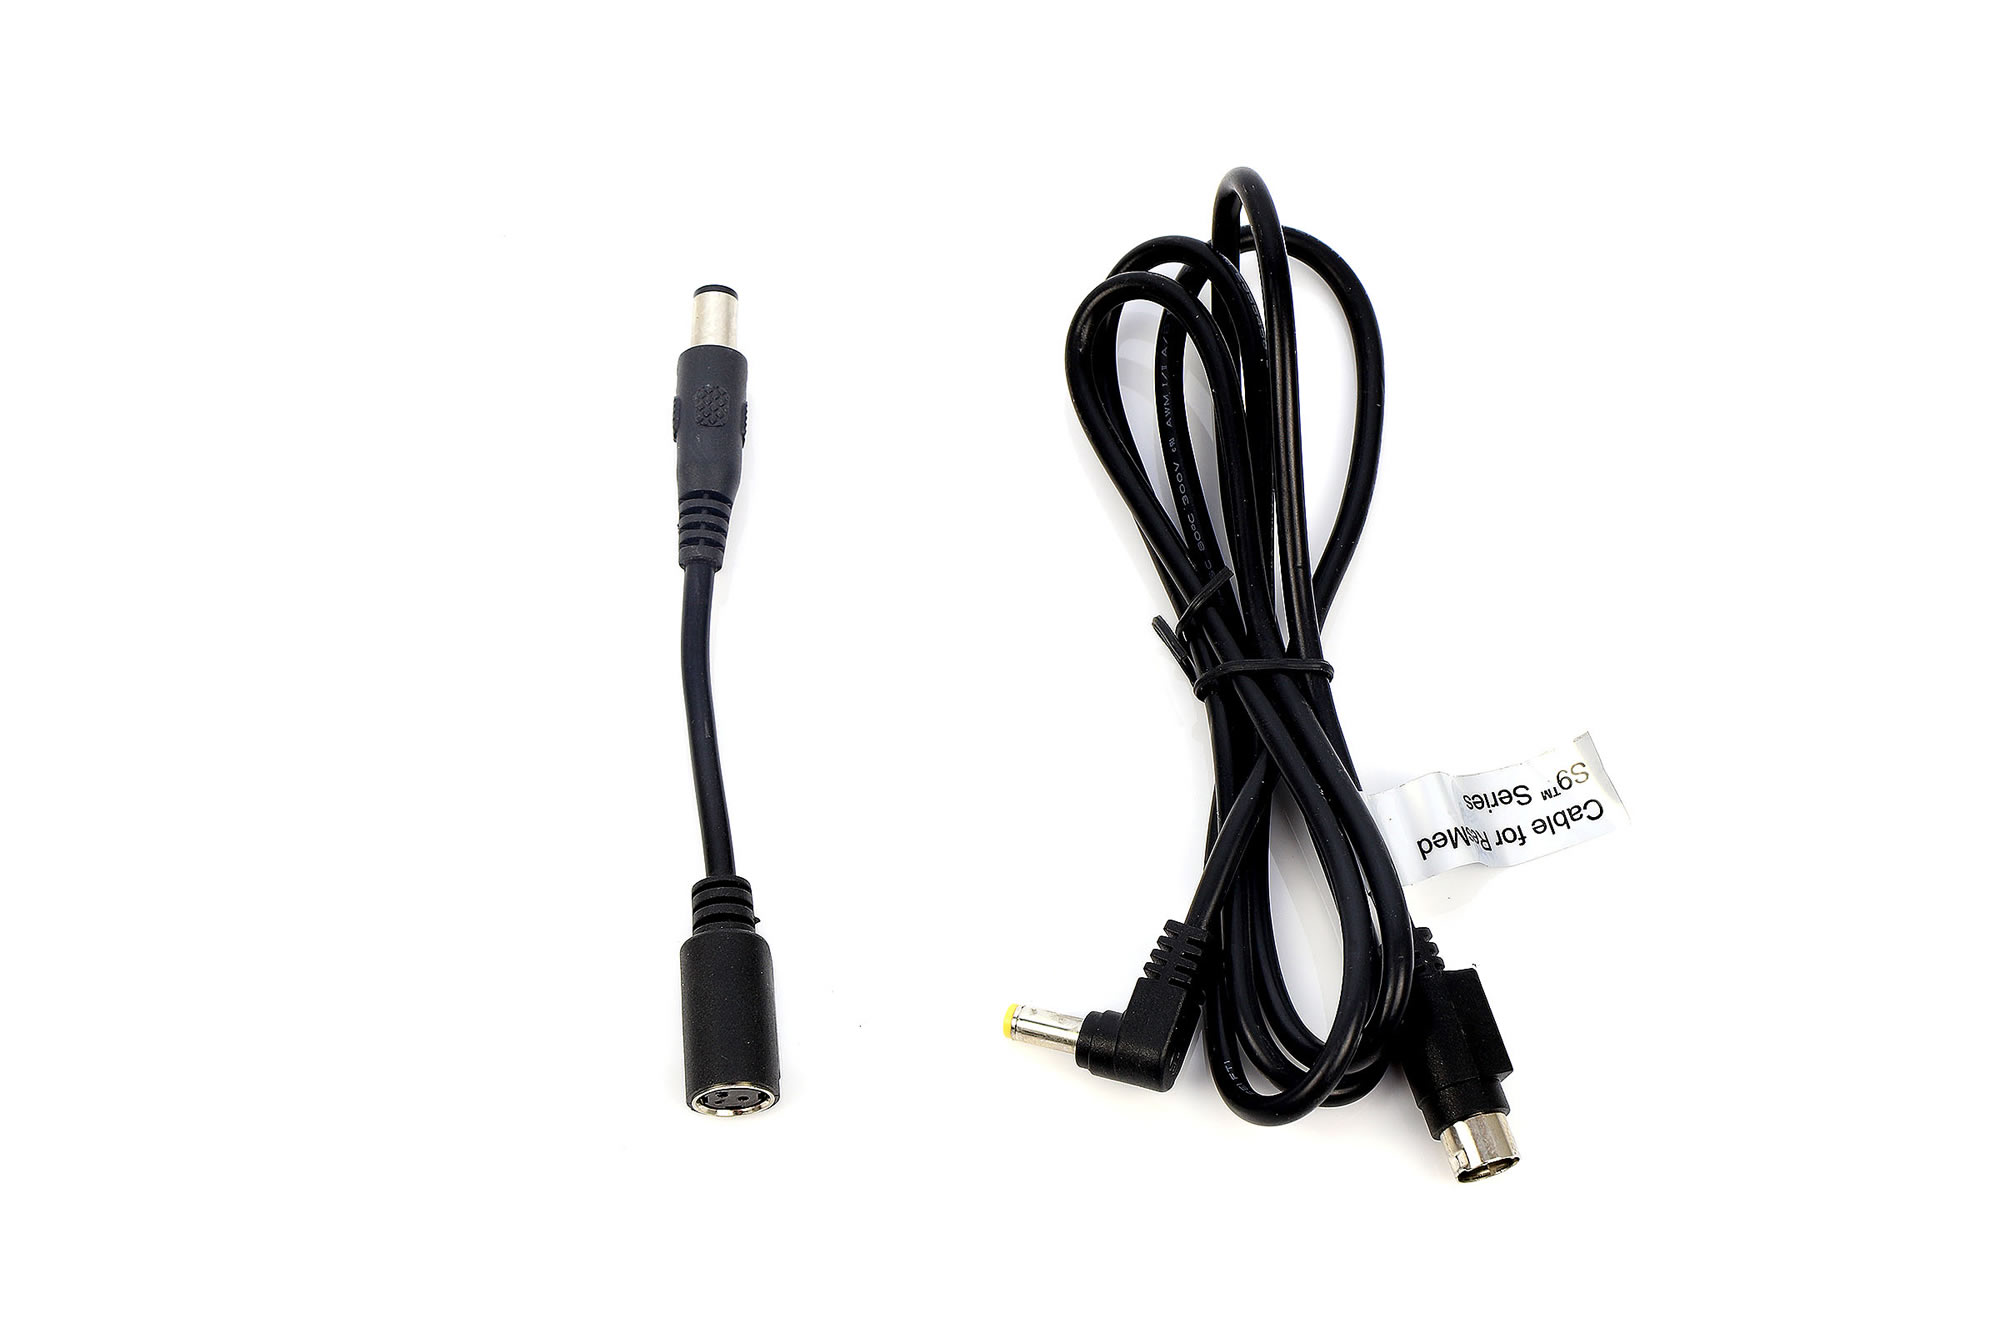 Featured image for “Medistrom Pilot-24 Lite Cable Kit - for ResMed S9 machine”